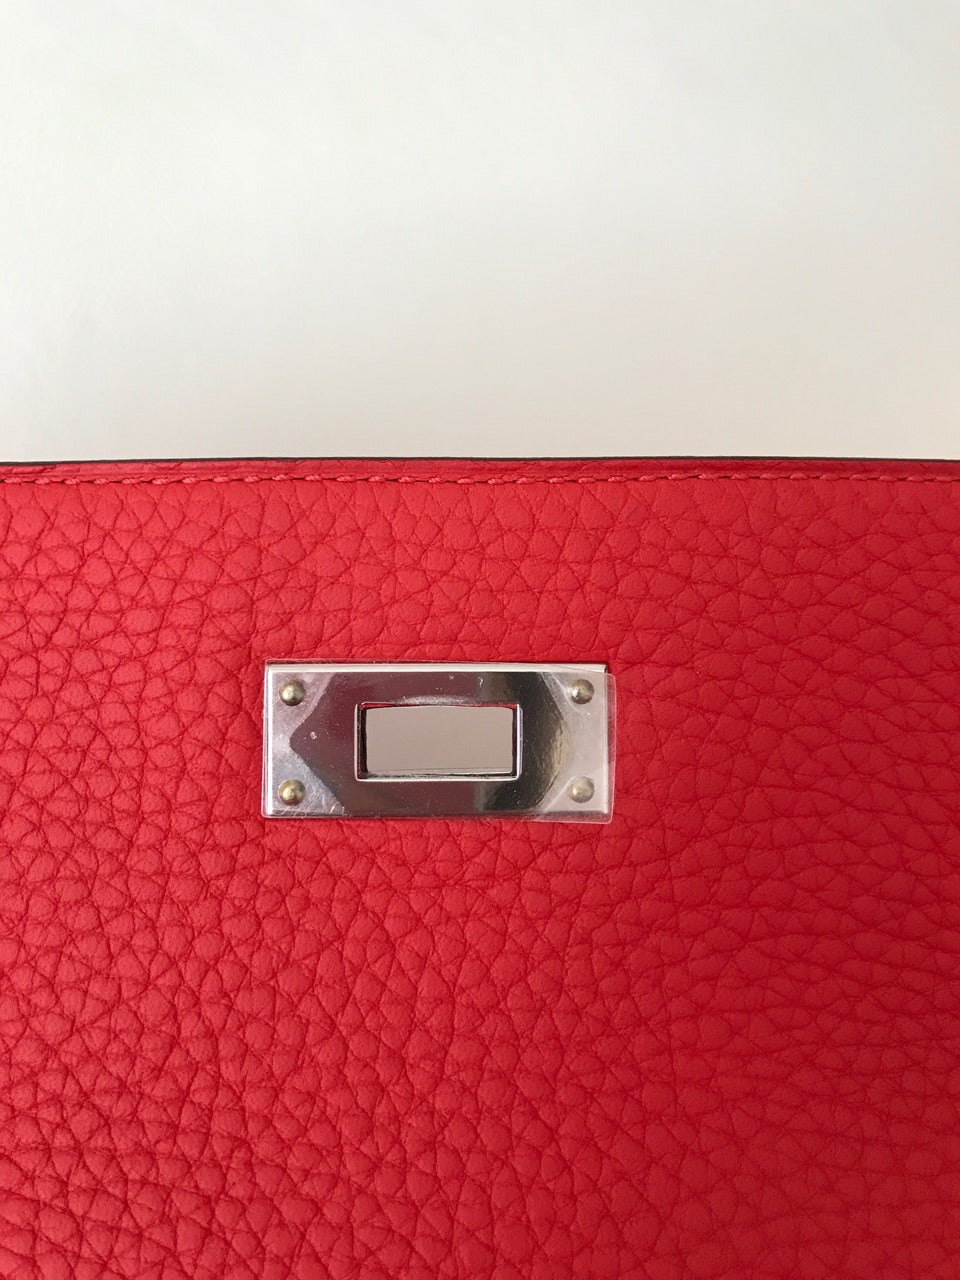 SOLD,Hermes Kelly 32 Sellier Rouge Casaque